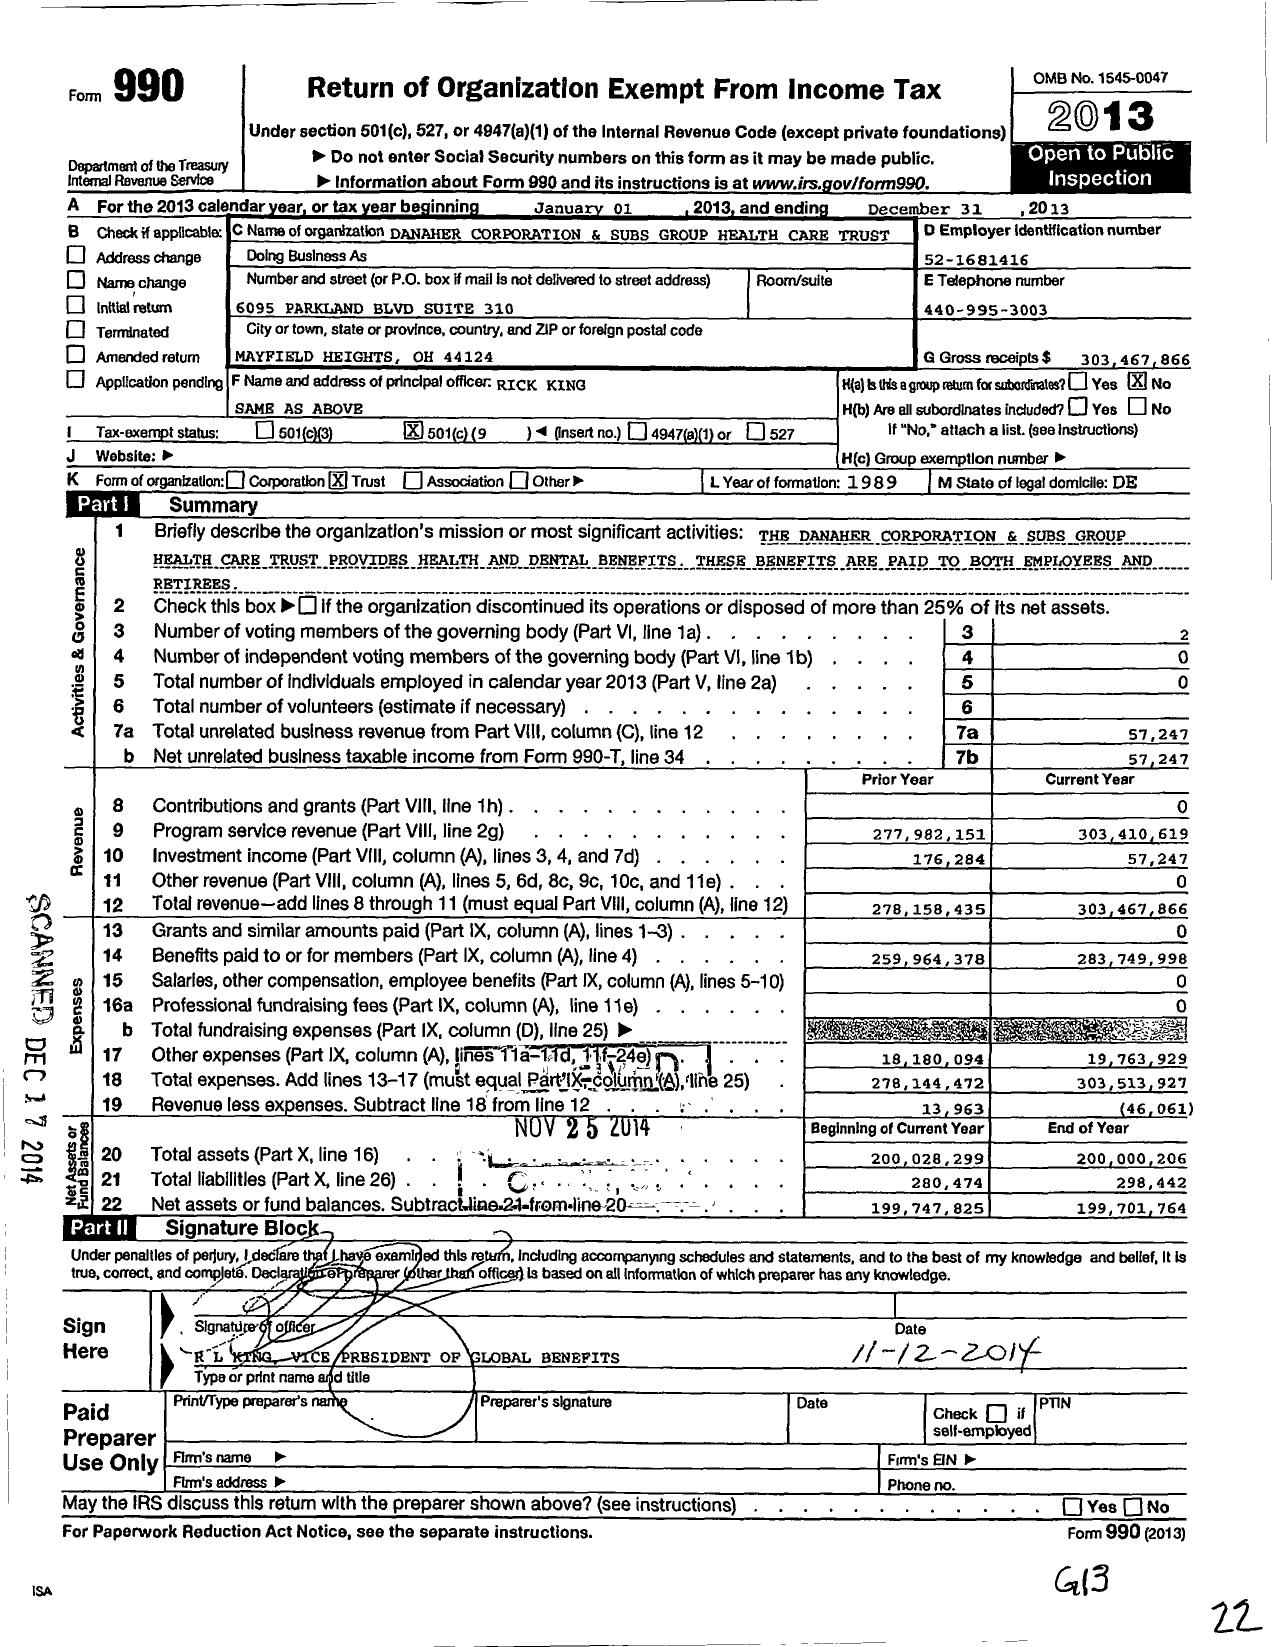 Image of first page of 2013 Form 990O for Danaher Corporation & Subs Health Care Trust